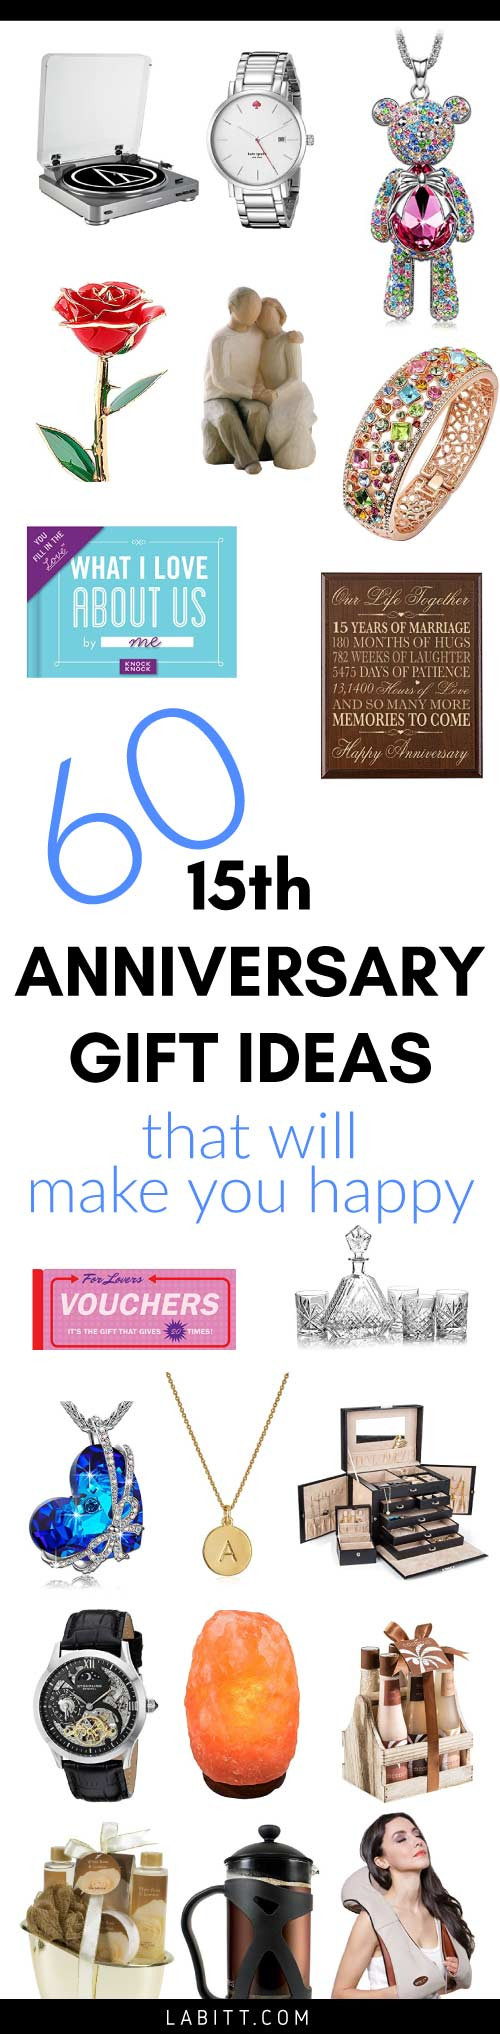 15 Year Anniversary Gift Ideas For Her
 15th Wedding Anniversary Gift Ideas for Her